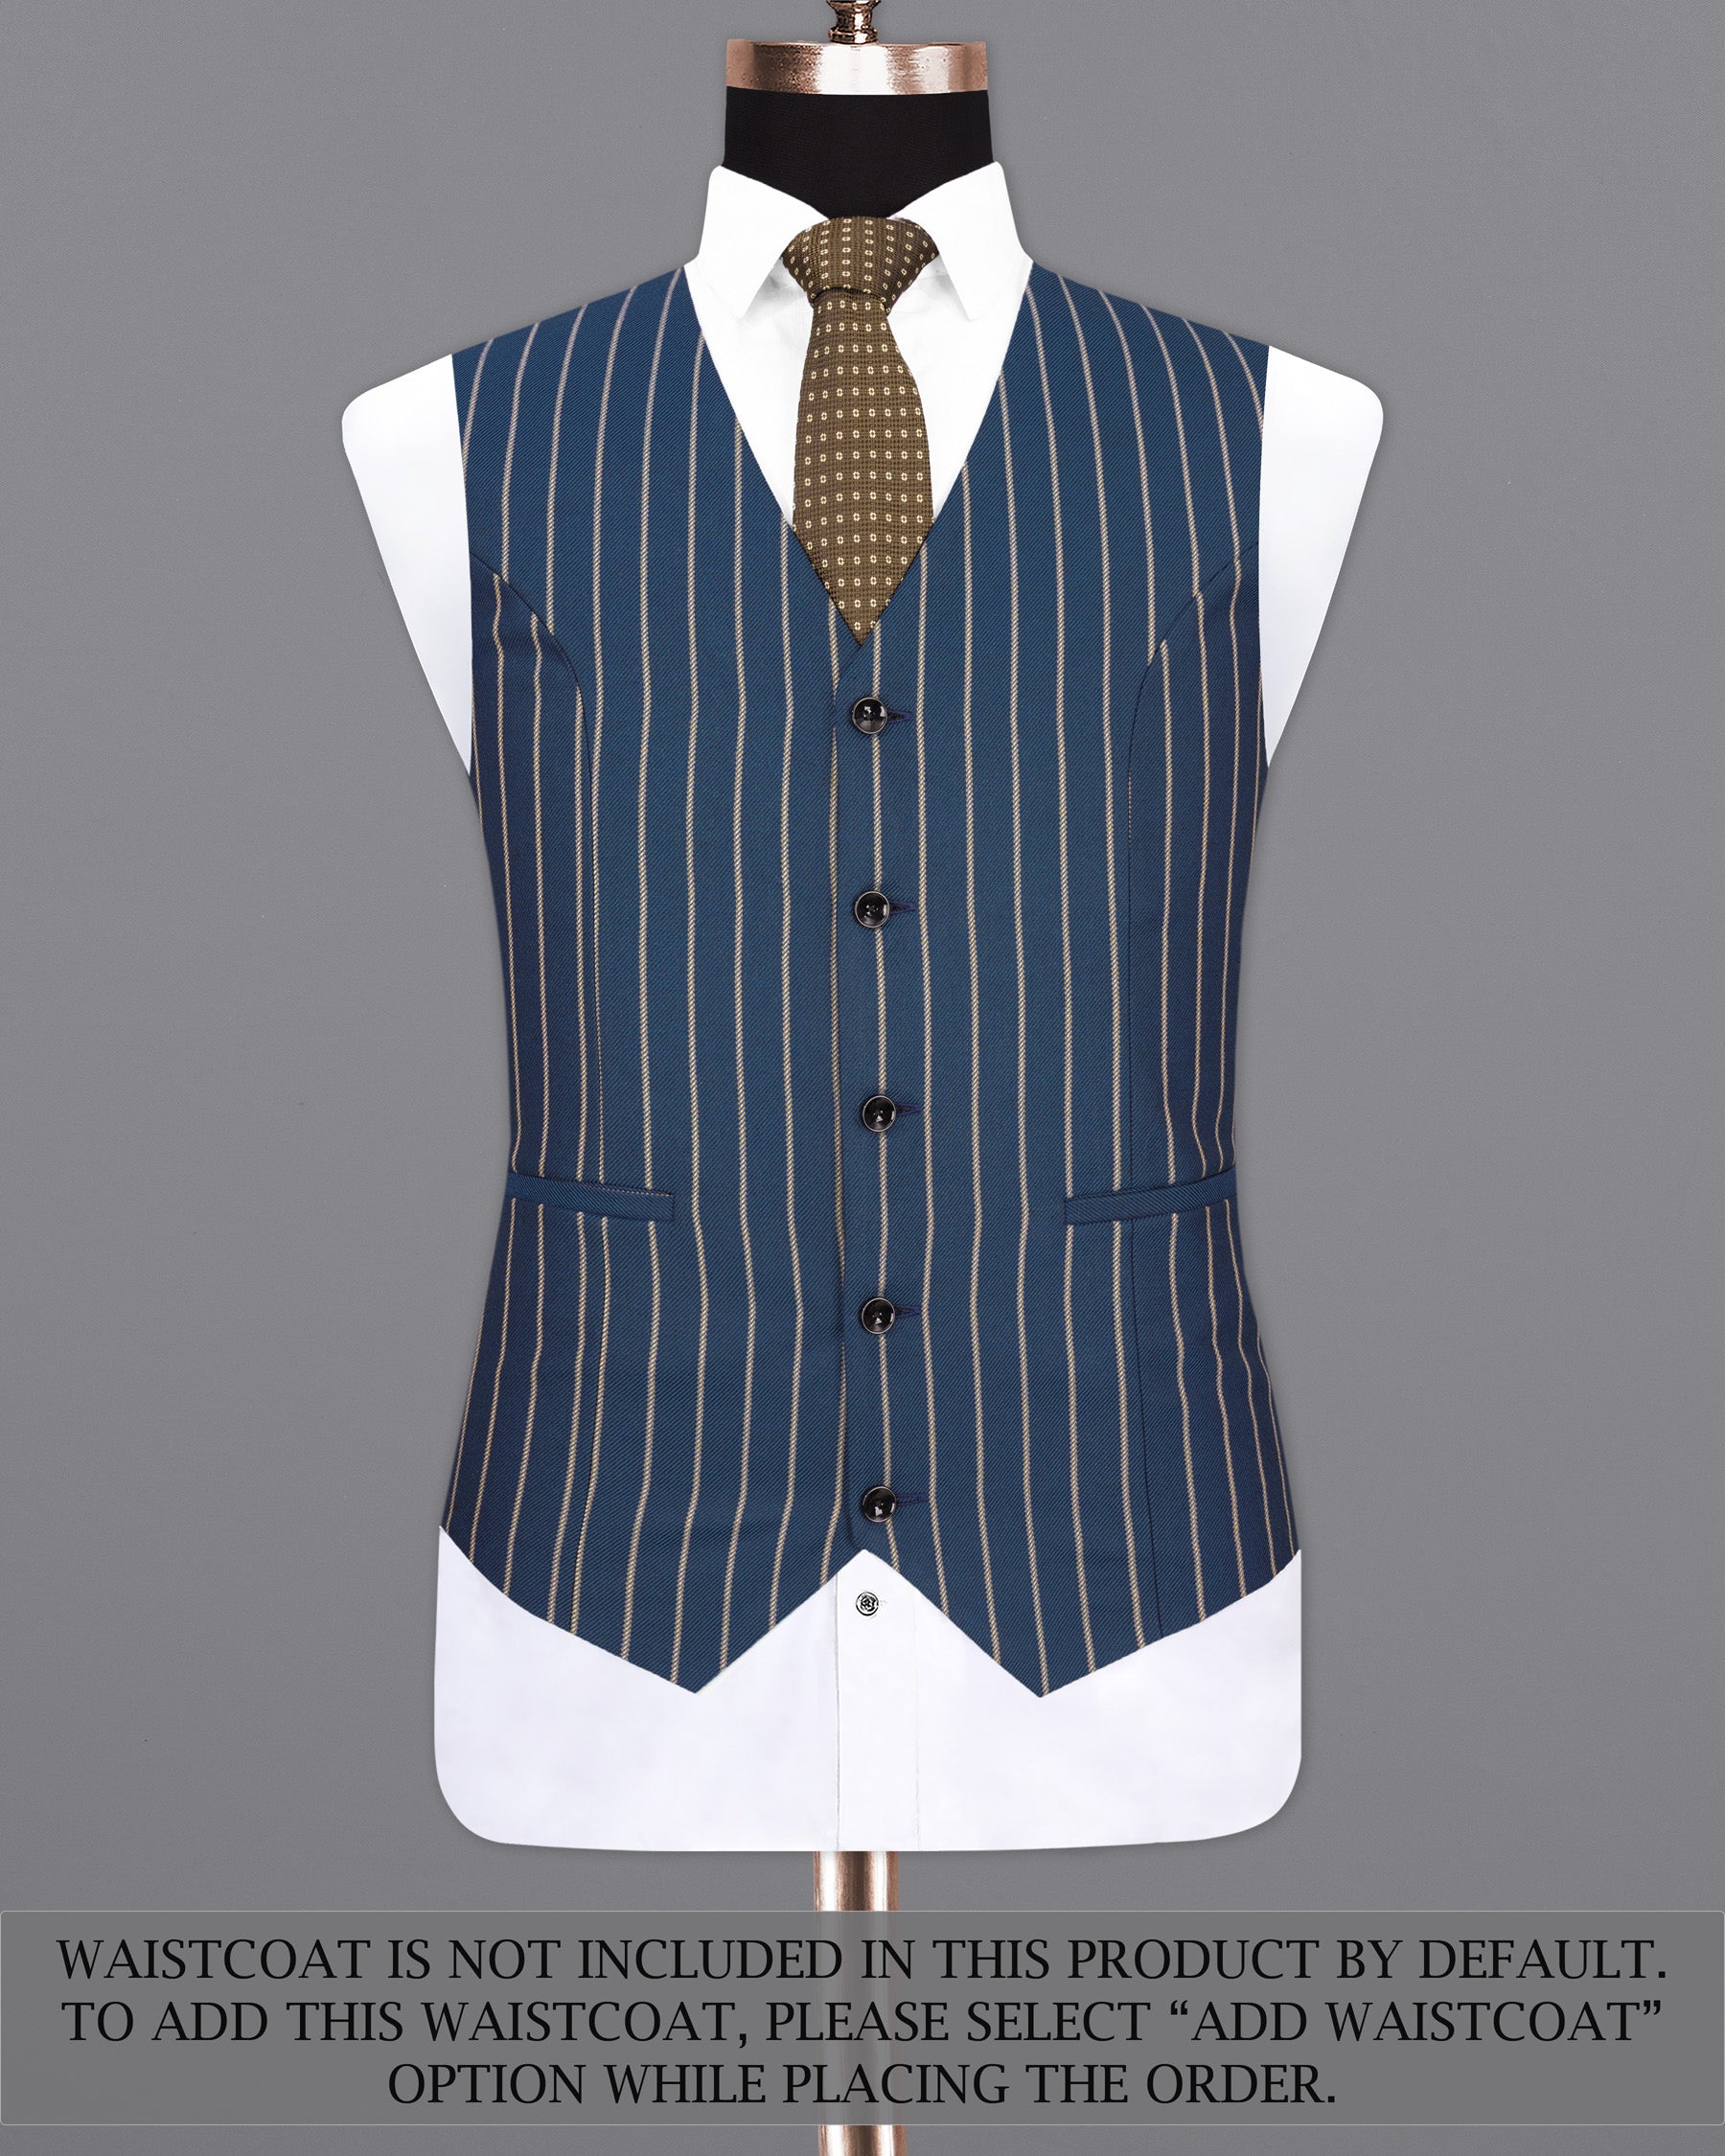 Limed Spruce Blue Striped Double Breasted Suit